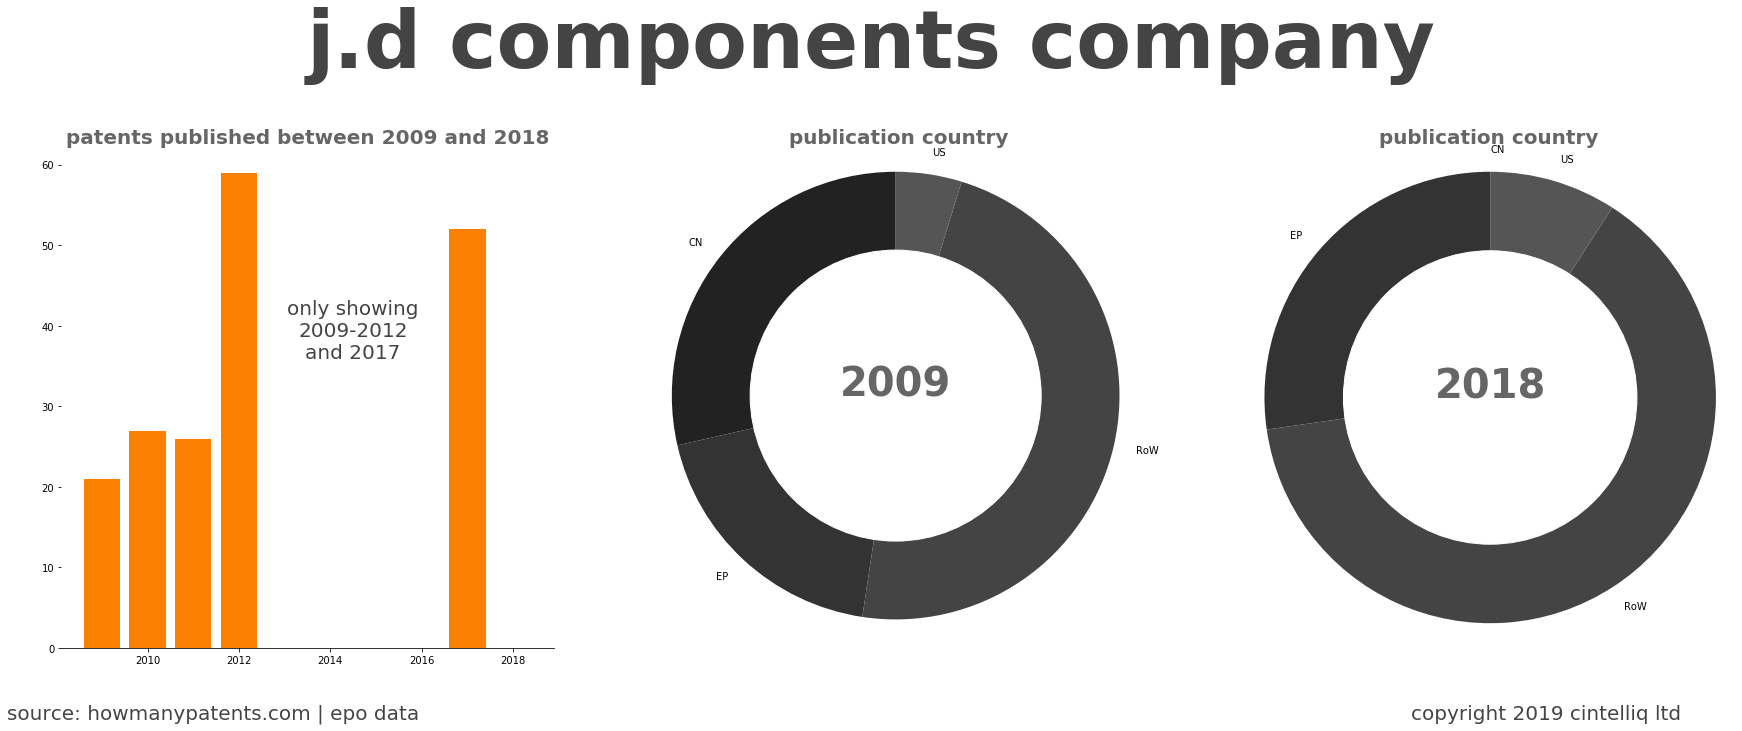 summary of patents for J.D Components Company